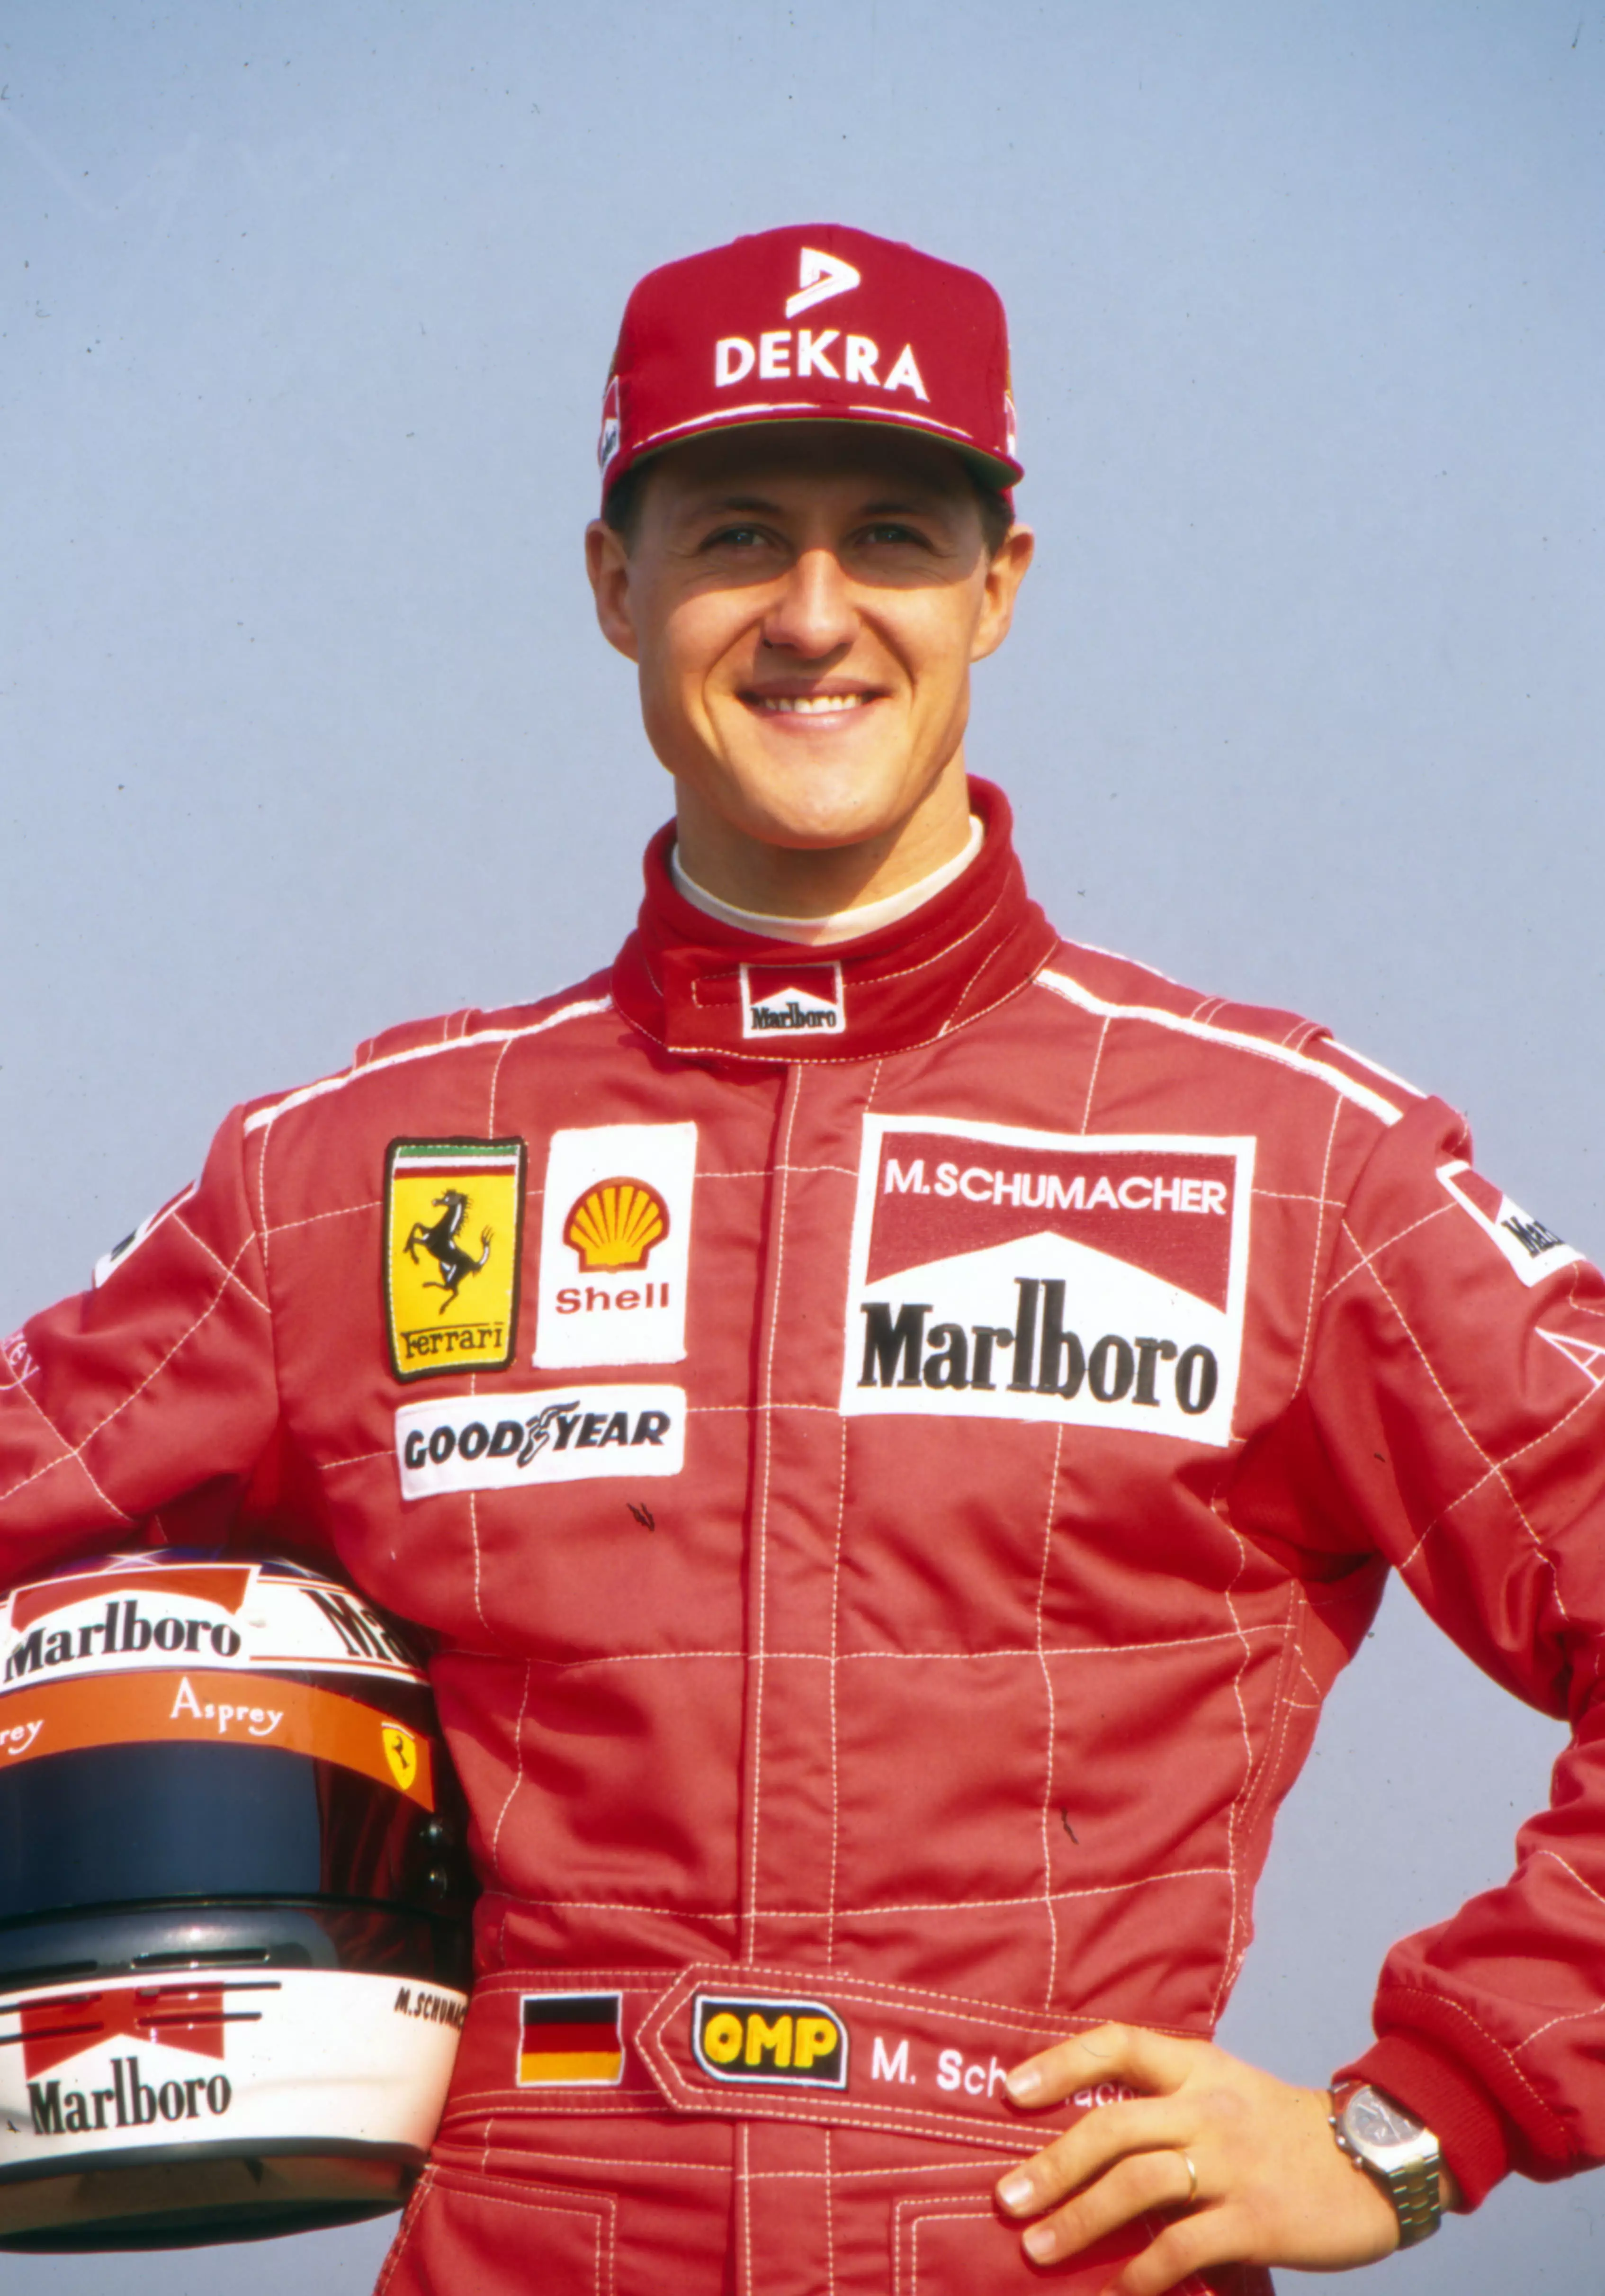 Schumacher amassed a total of 91 race wins over his decorated F1 career.